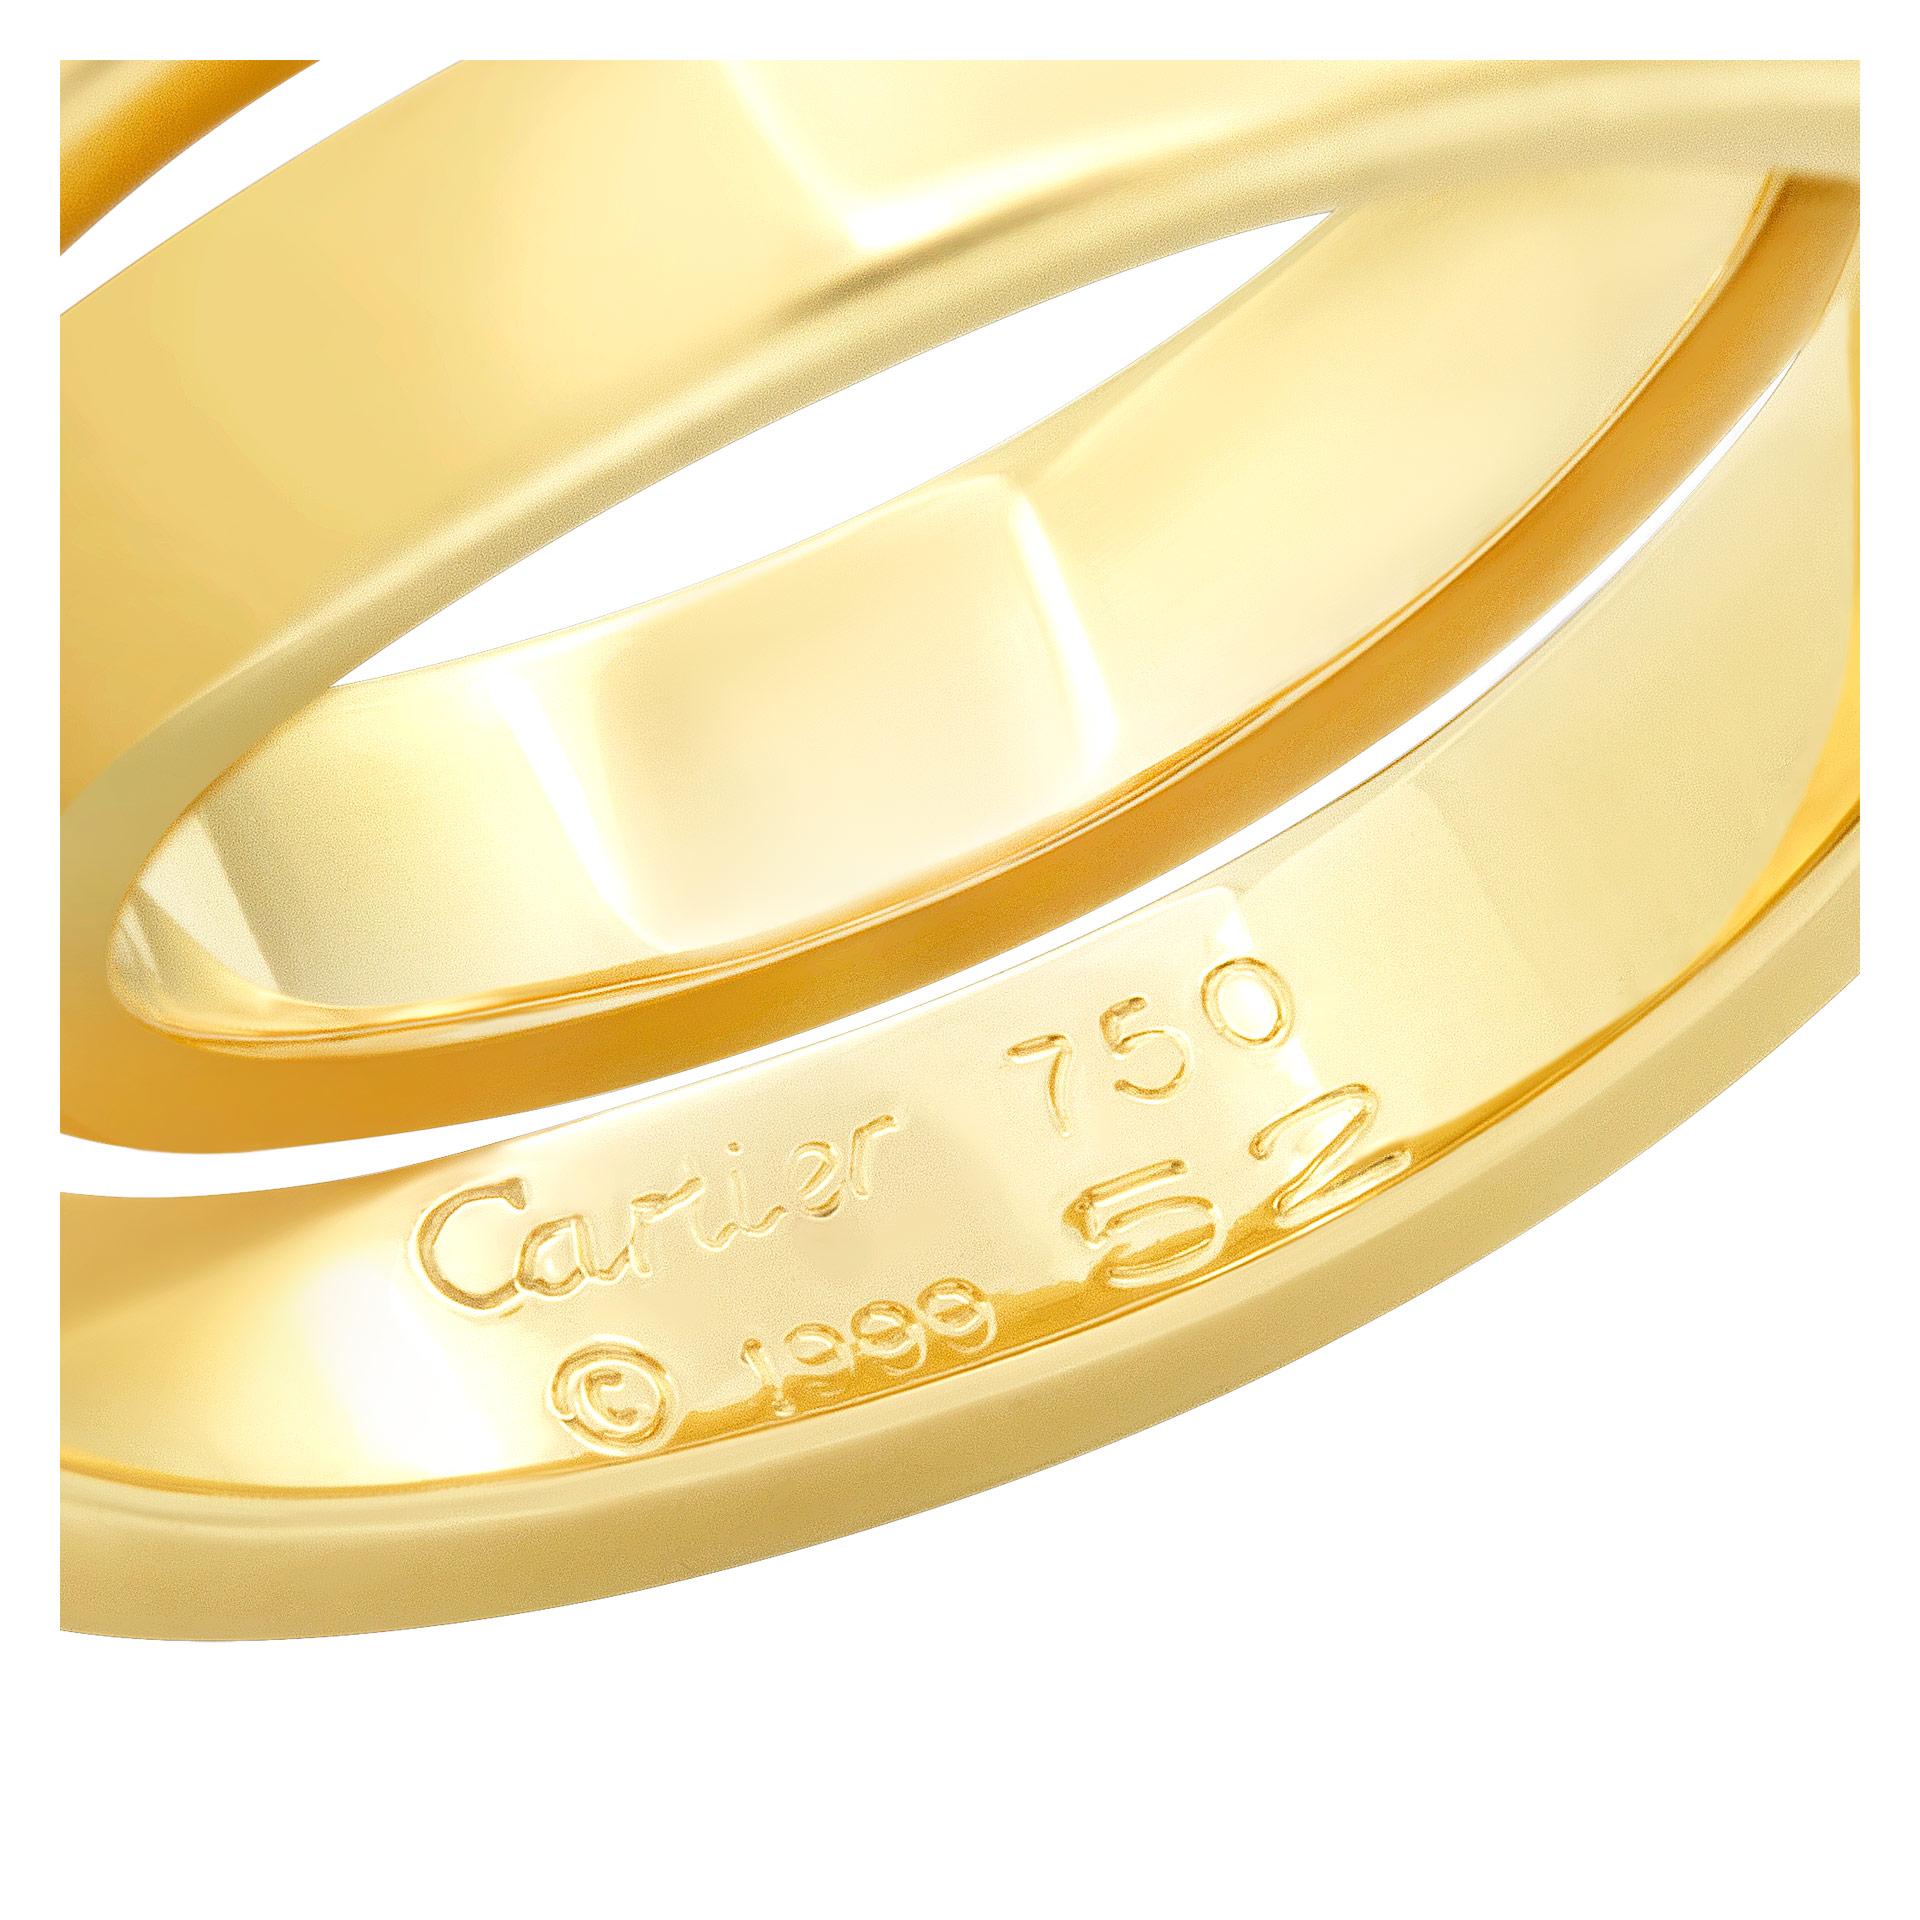 ESTIMATED RETAIL: $3,600 YOUR PRICE: $2,200 - Cartier Nouvelle Vague Crossover ring in 18k. Size 6.5. 0.33